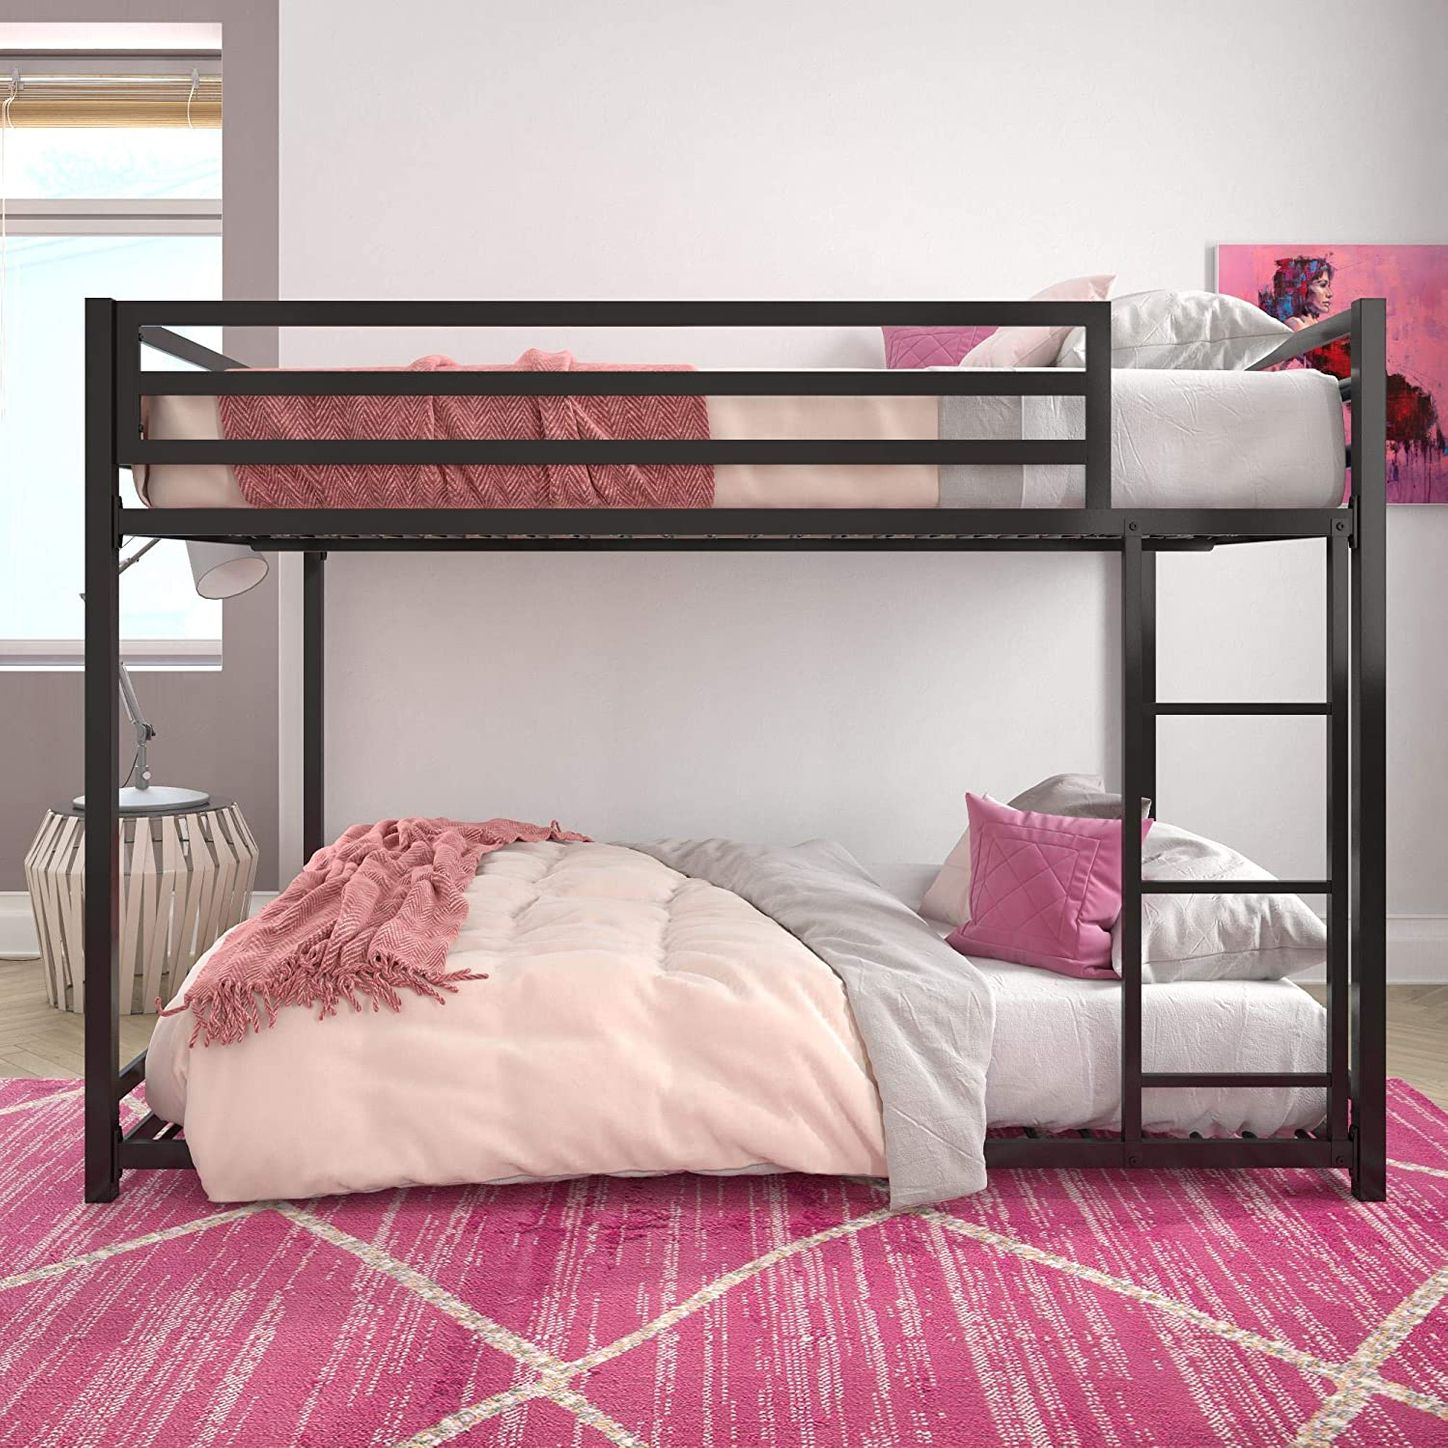 8 Best Bunk Beds 2020 The Strategist, Best Bunk Beds For College Students